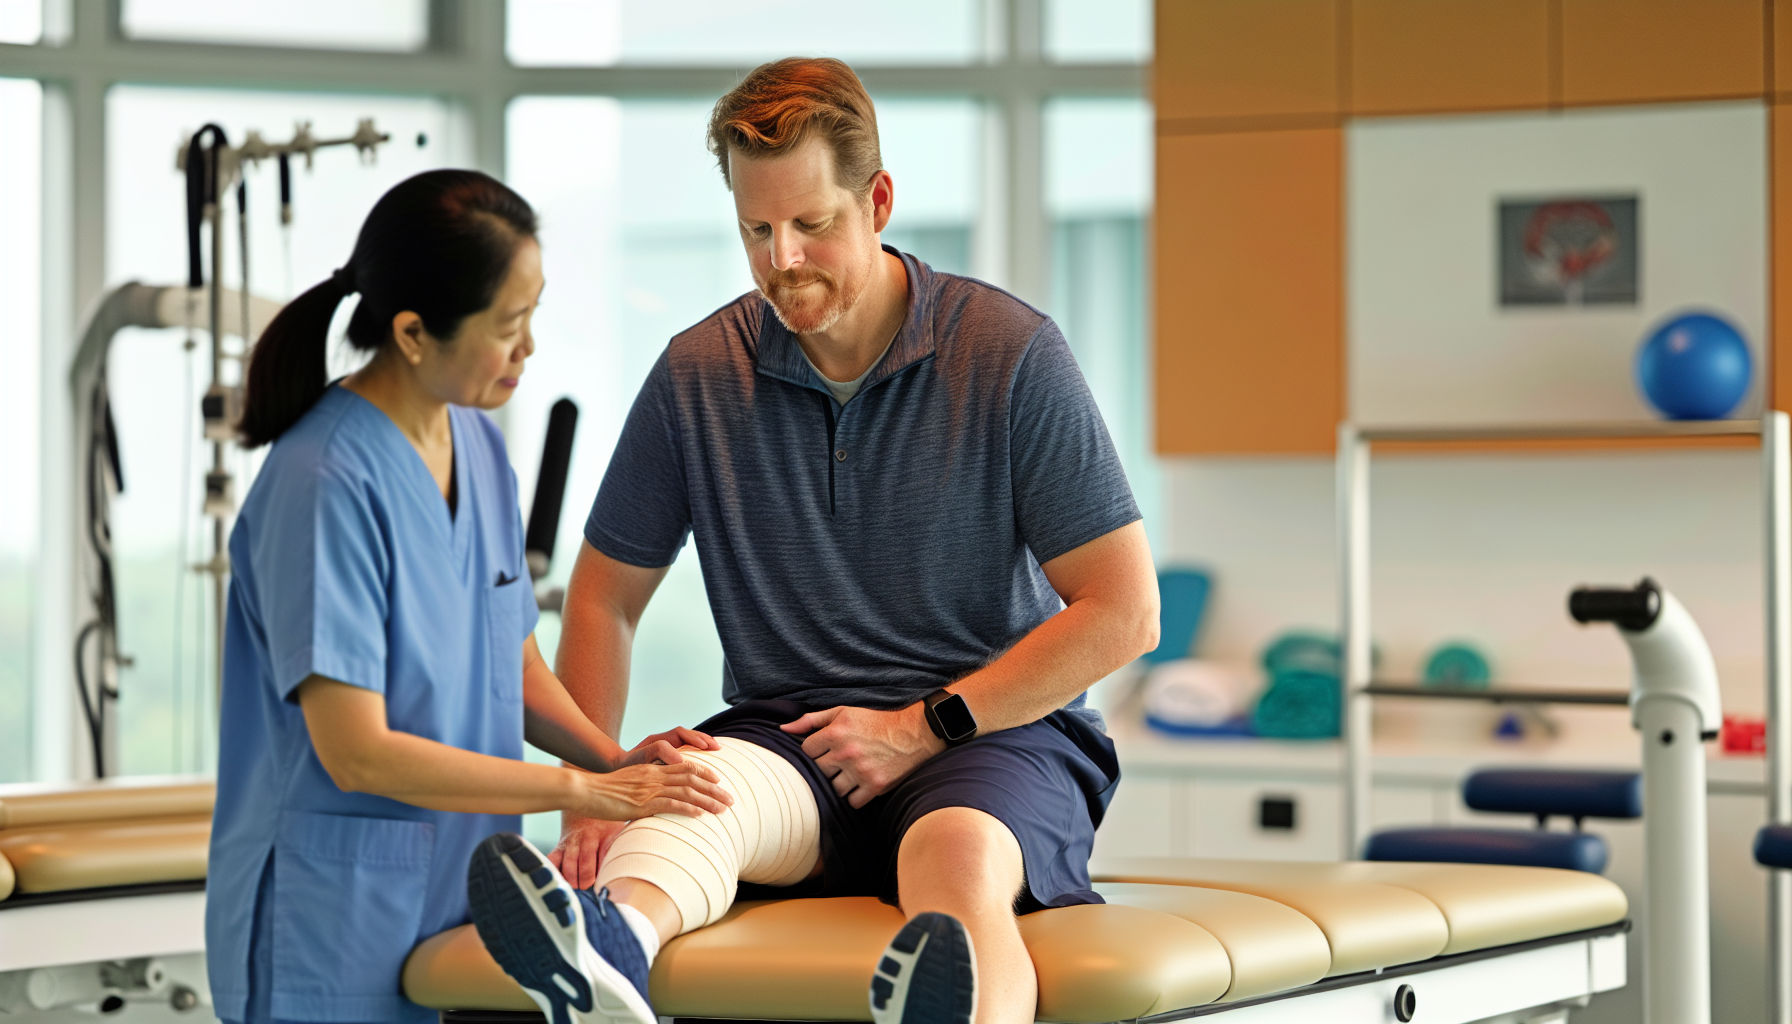 Patient undergoing physical therapy after ACL surgery